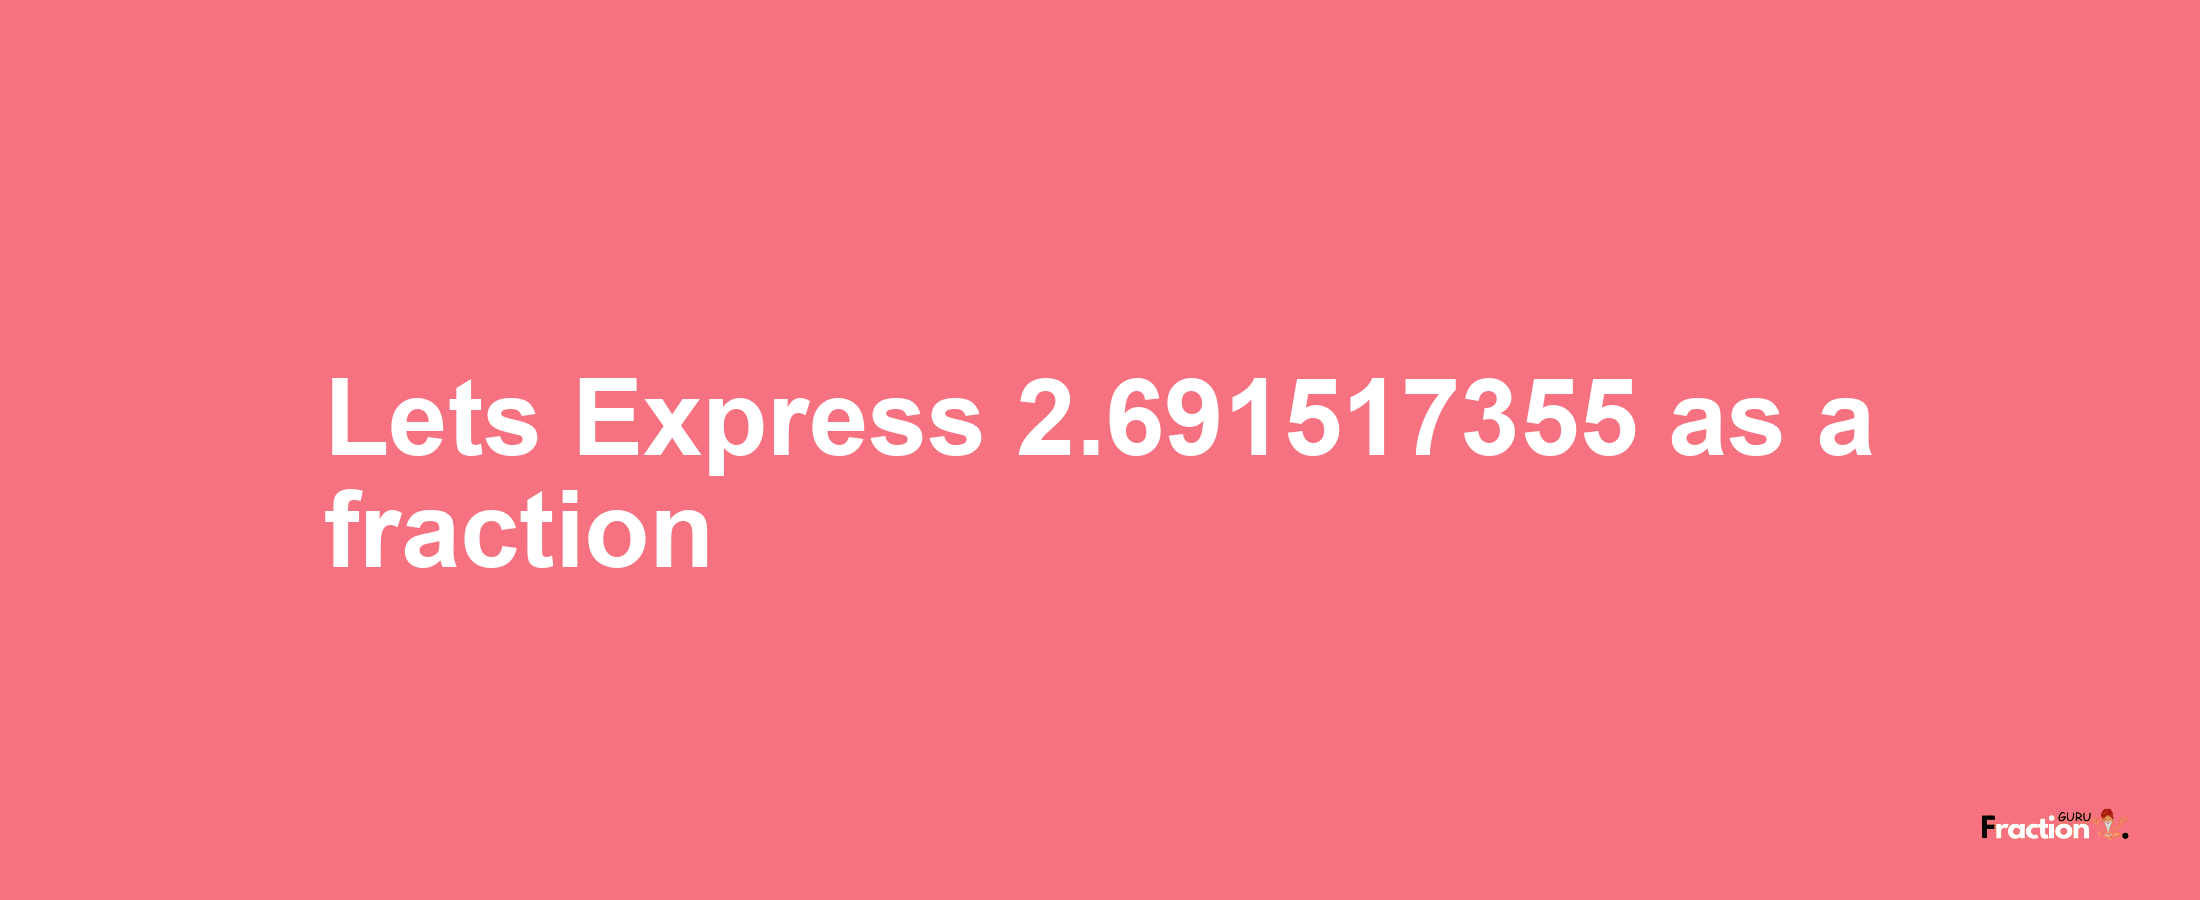 Lets Express 2.691517355 as afraction